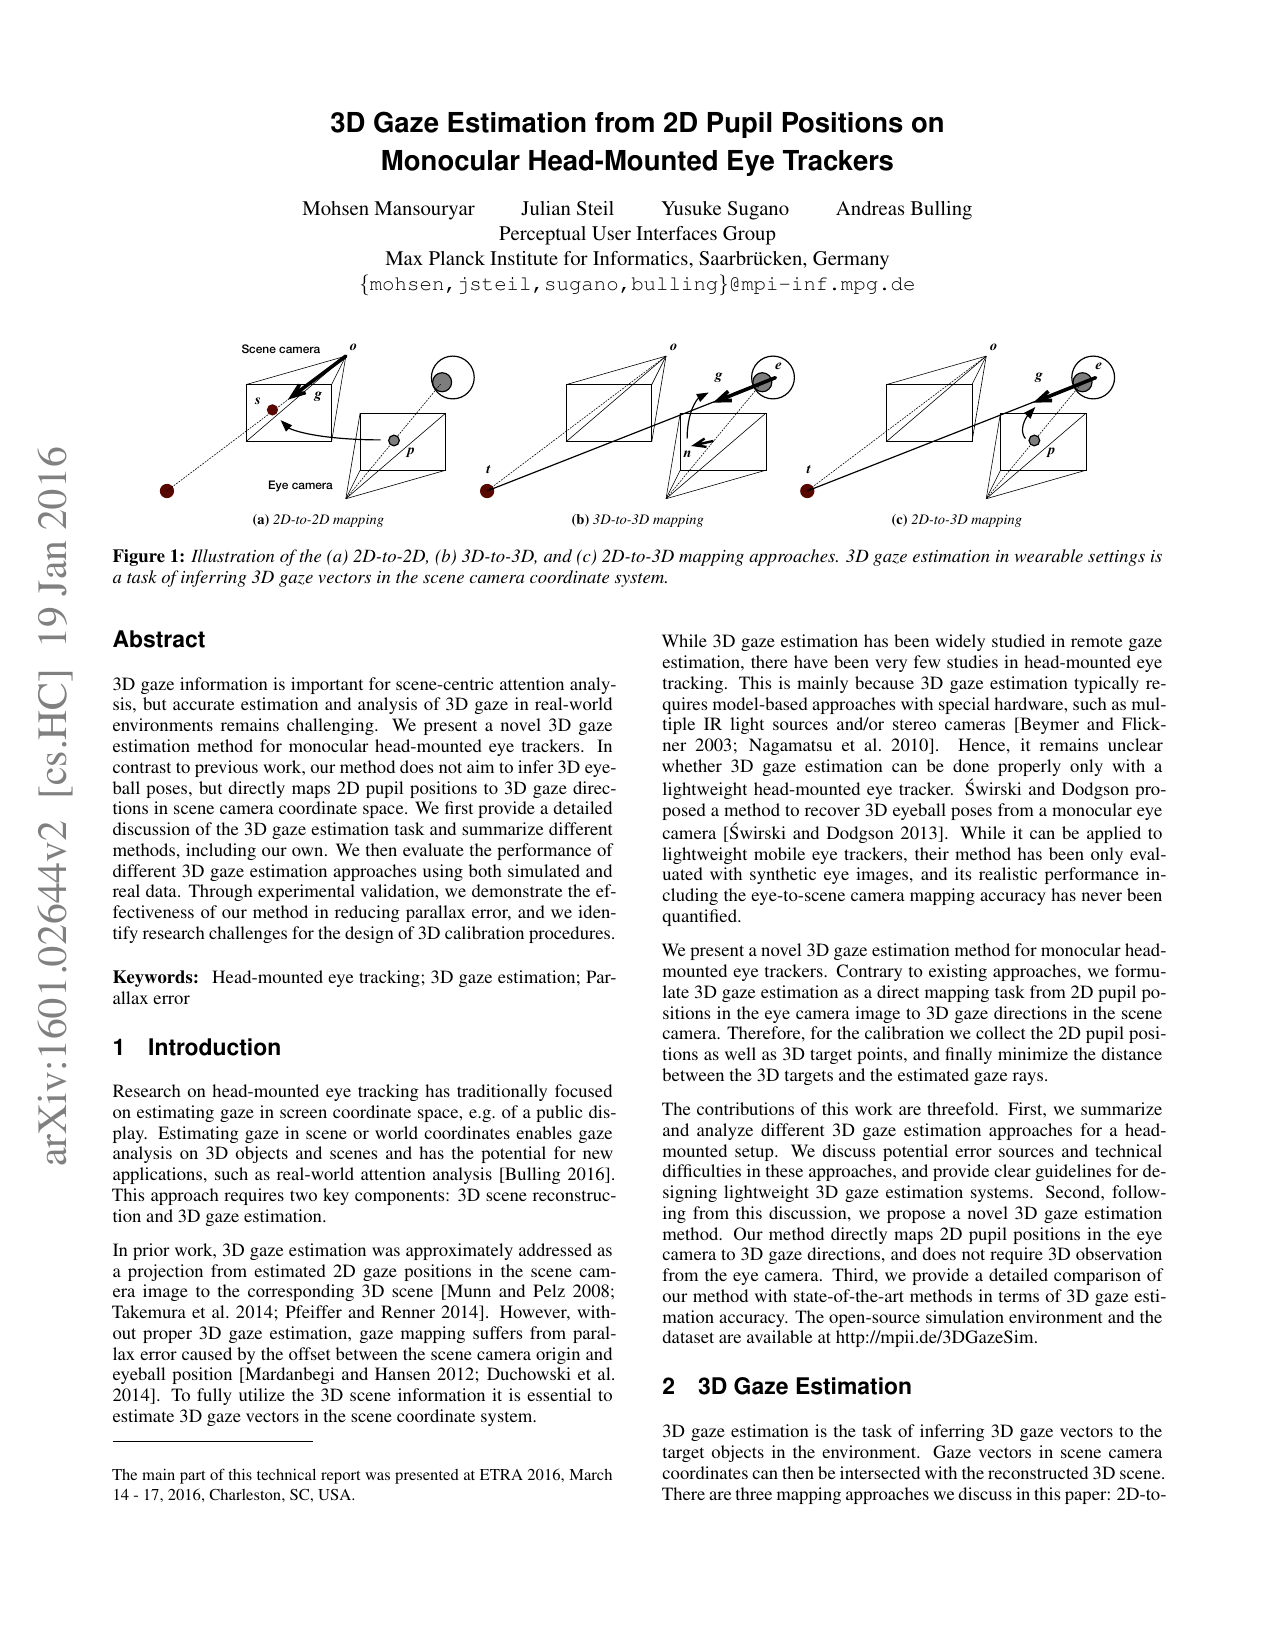 3D Gaze Estimation from 2D Pupil Positions on Monocular Head-Mounted Eye Trackers